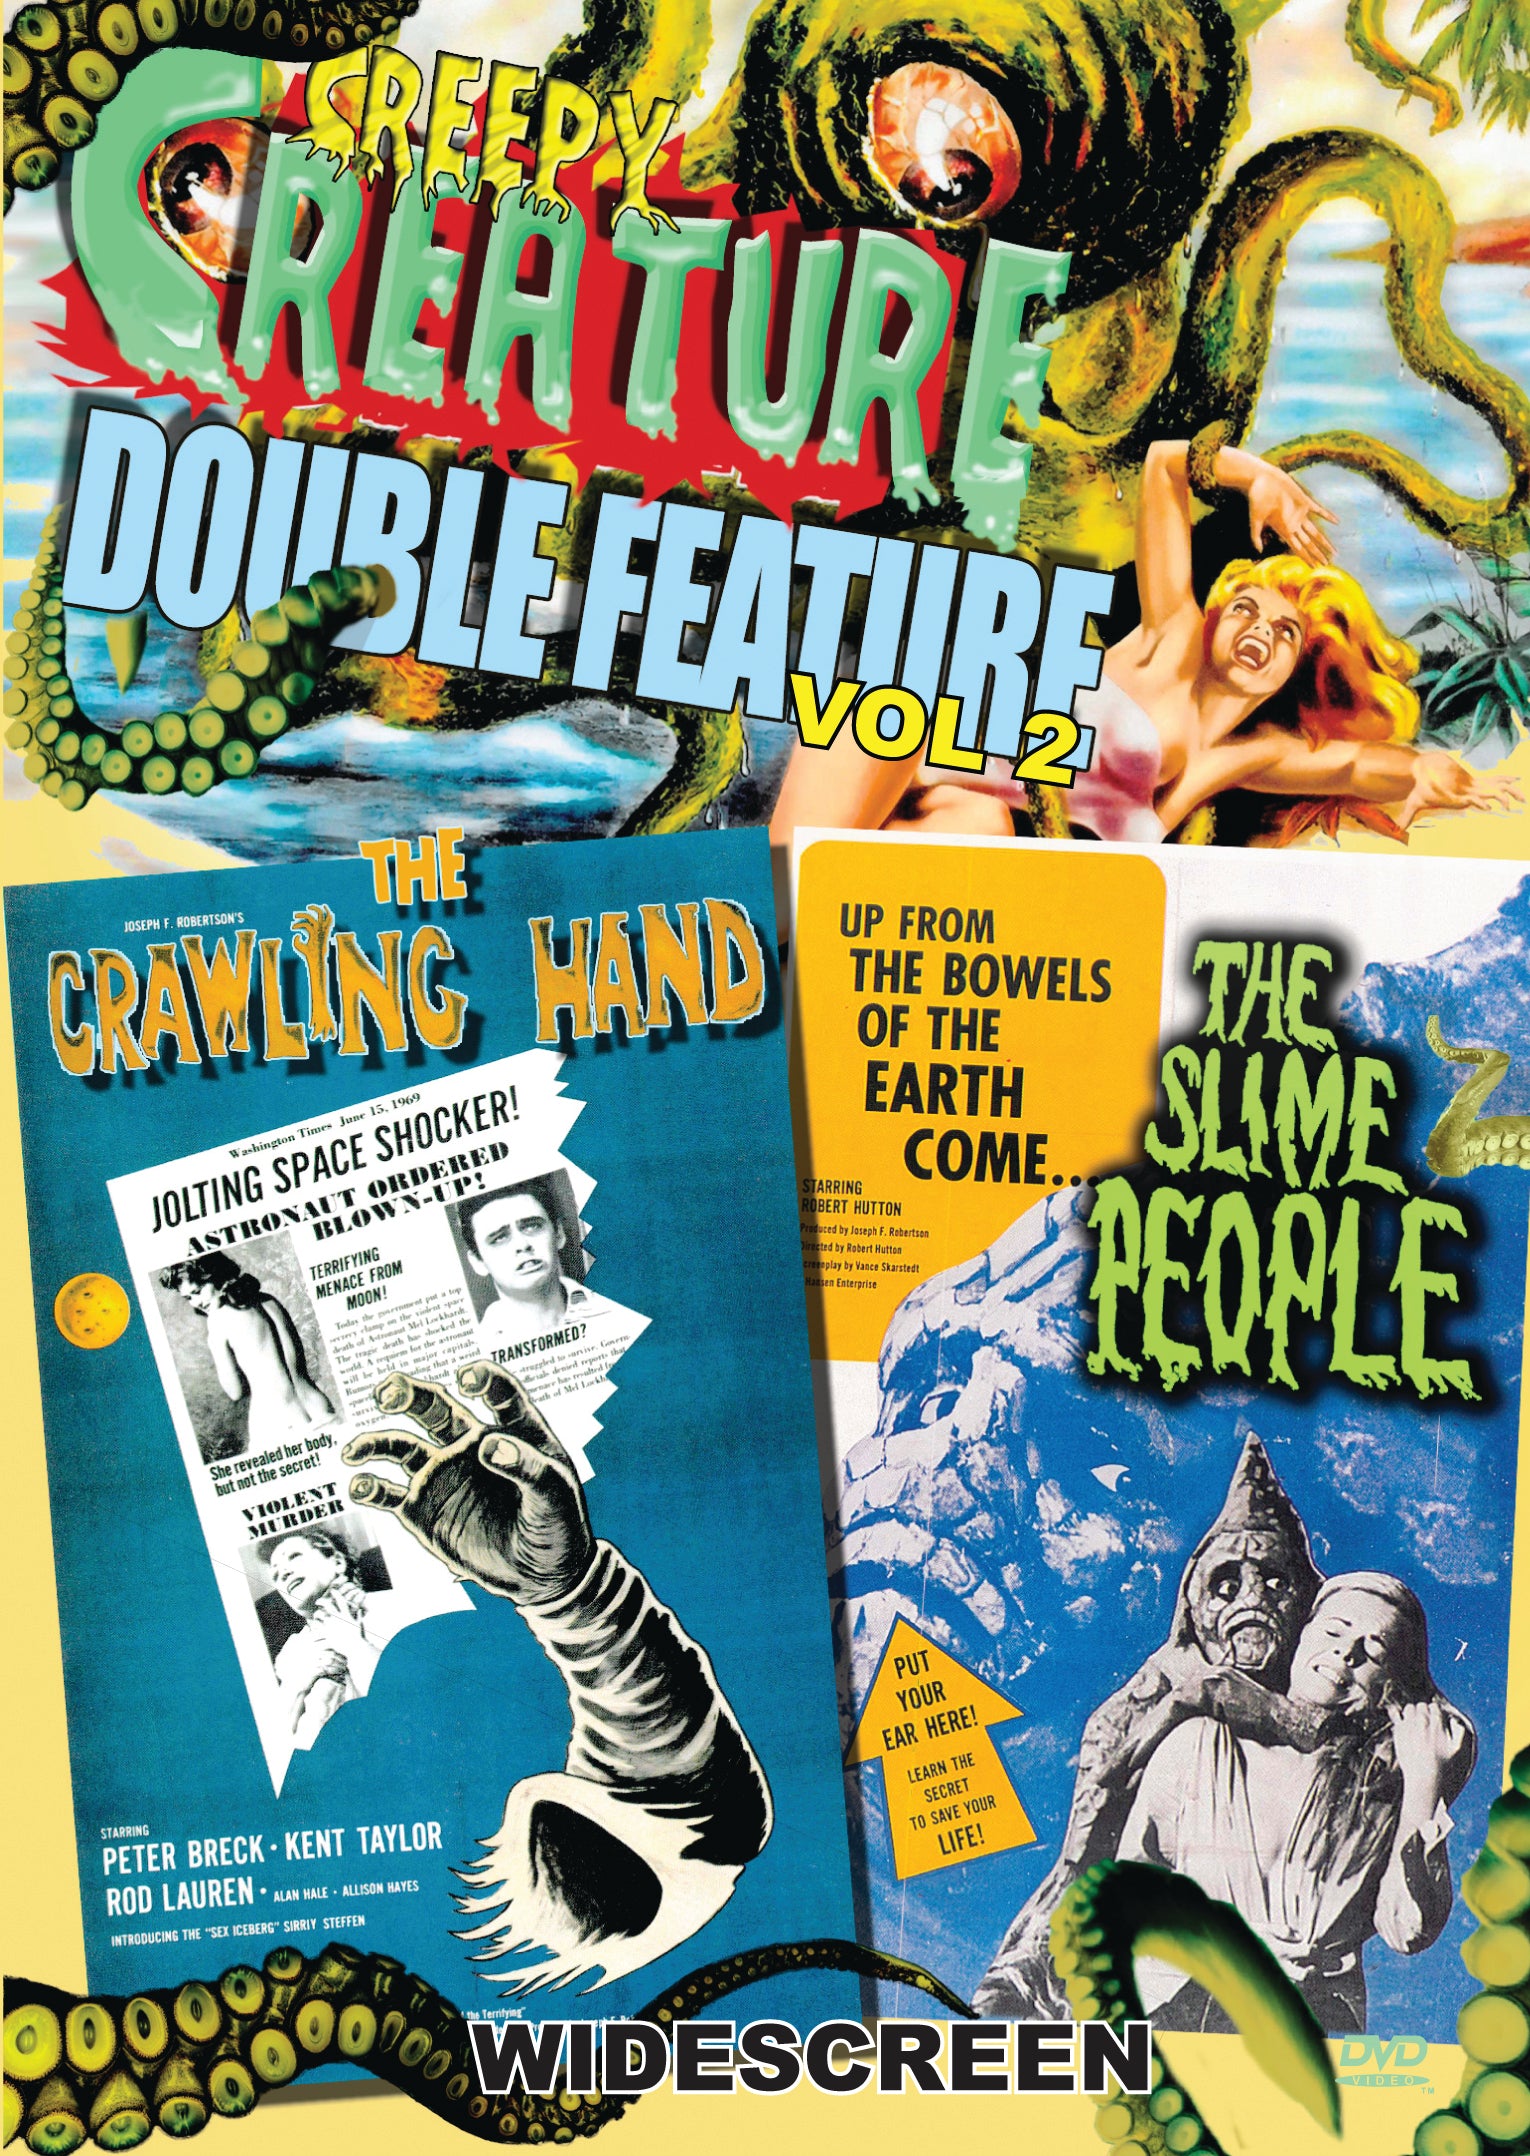 THE CRAWLING HAND / THE SLIME PEOPLE DVD